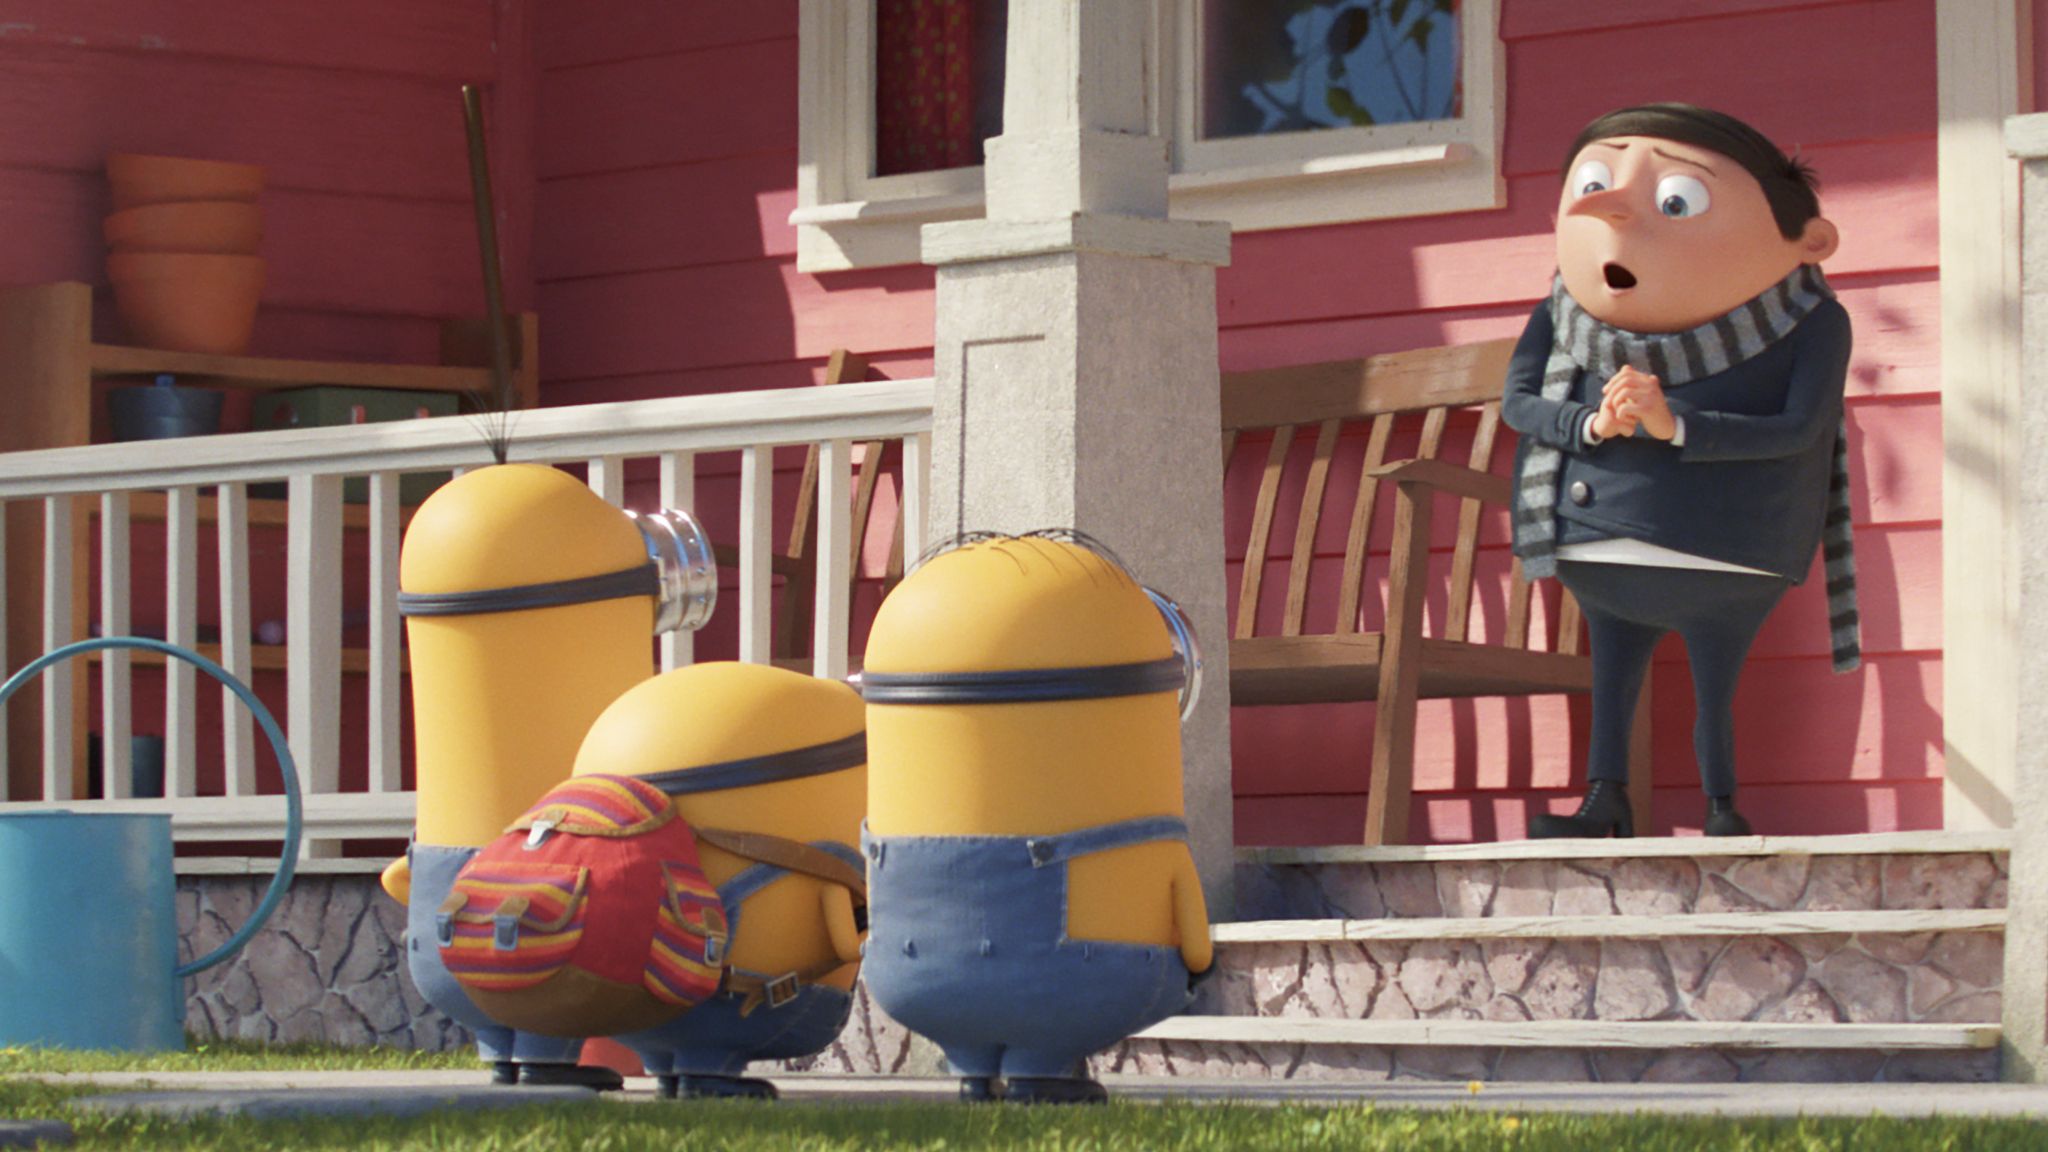 Minions: The Rise of Gru. Pic: Universal Pictures/Illumination Entertainment